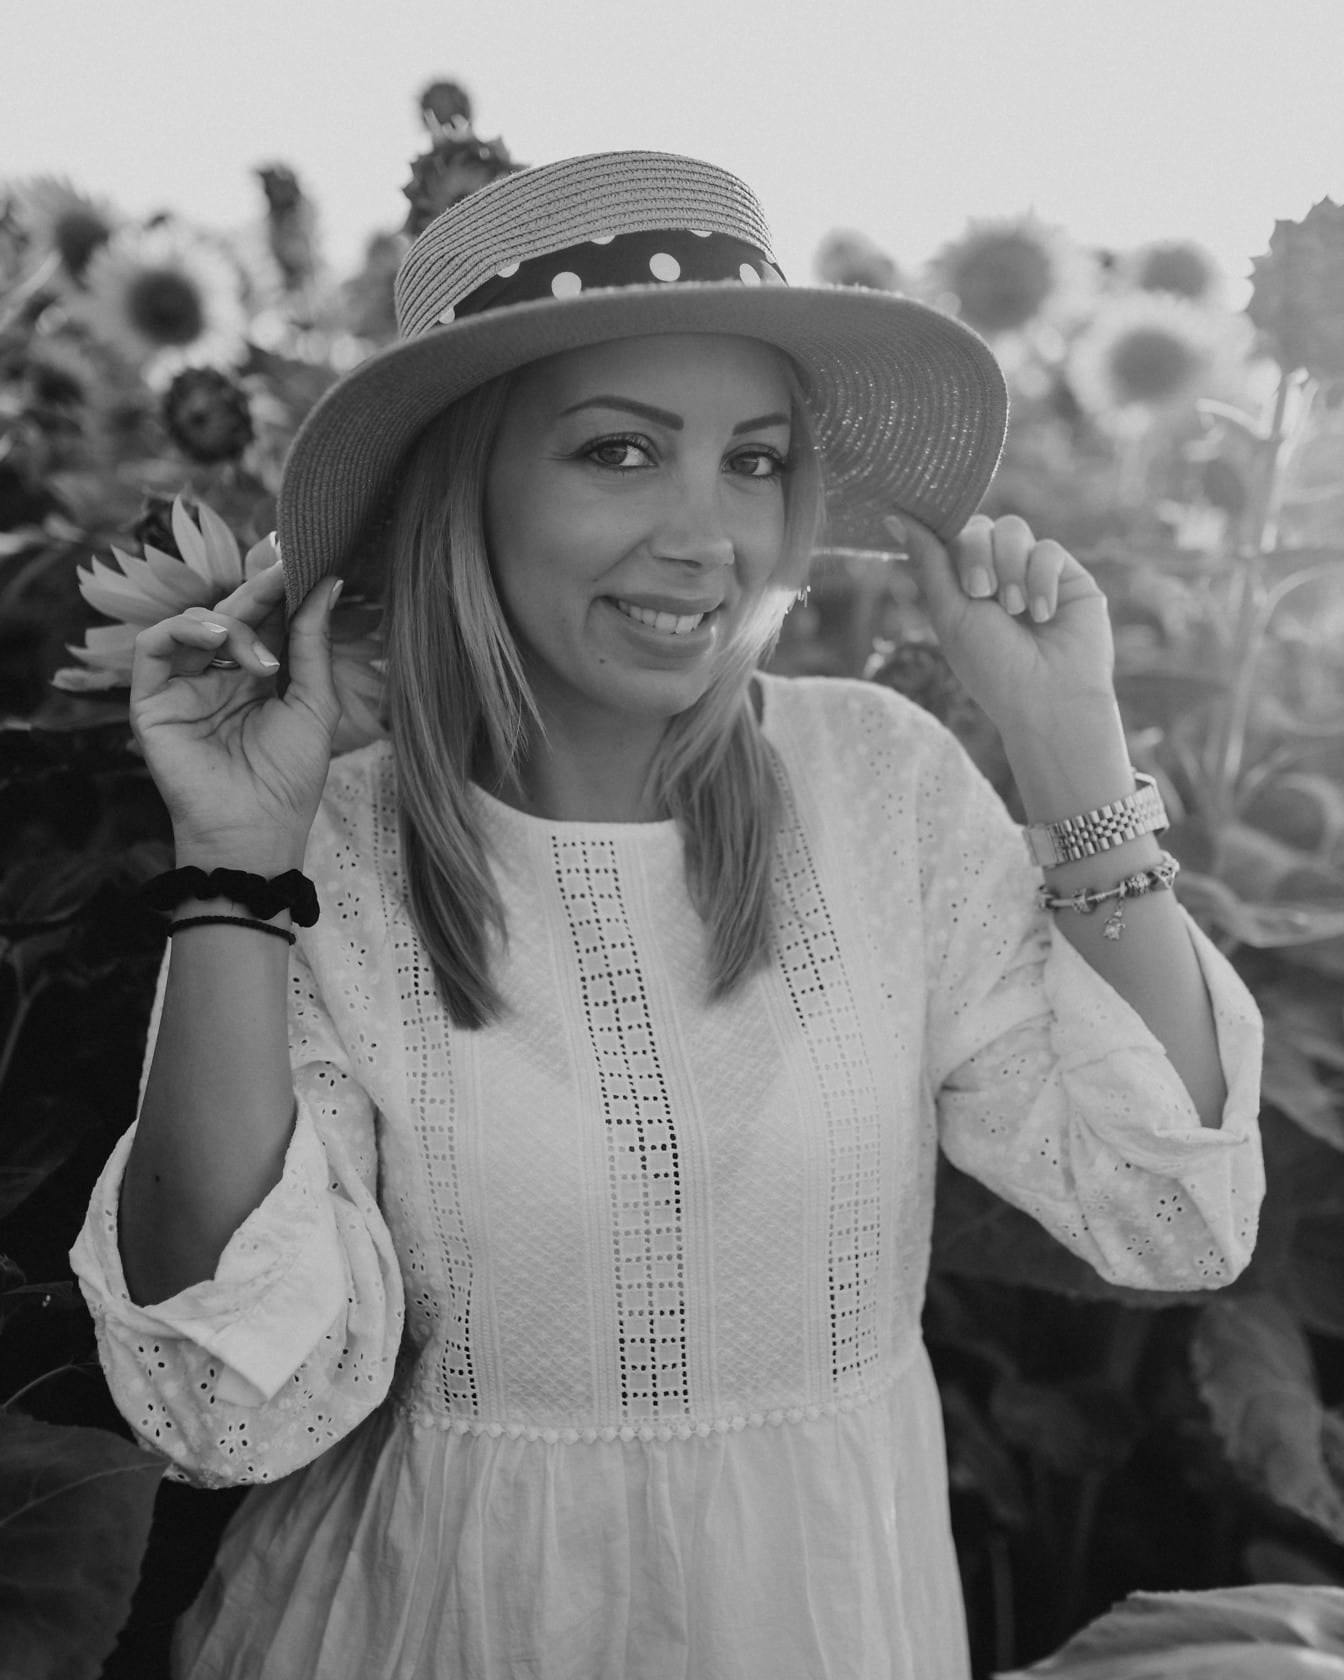 Black and white portrait of a beautiful smiling cowgirl wearing a straw hat in a sunflower field